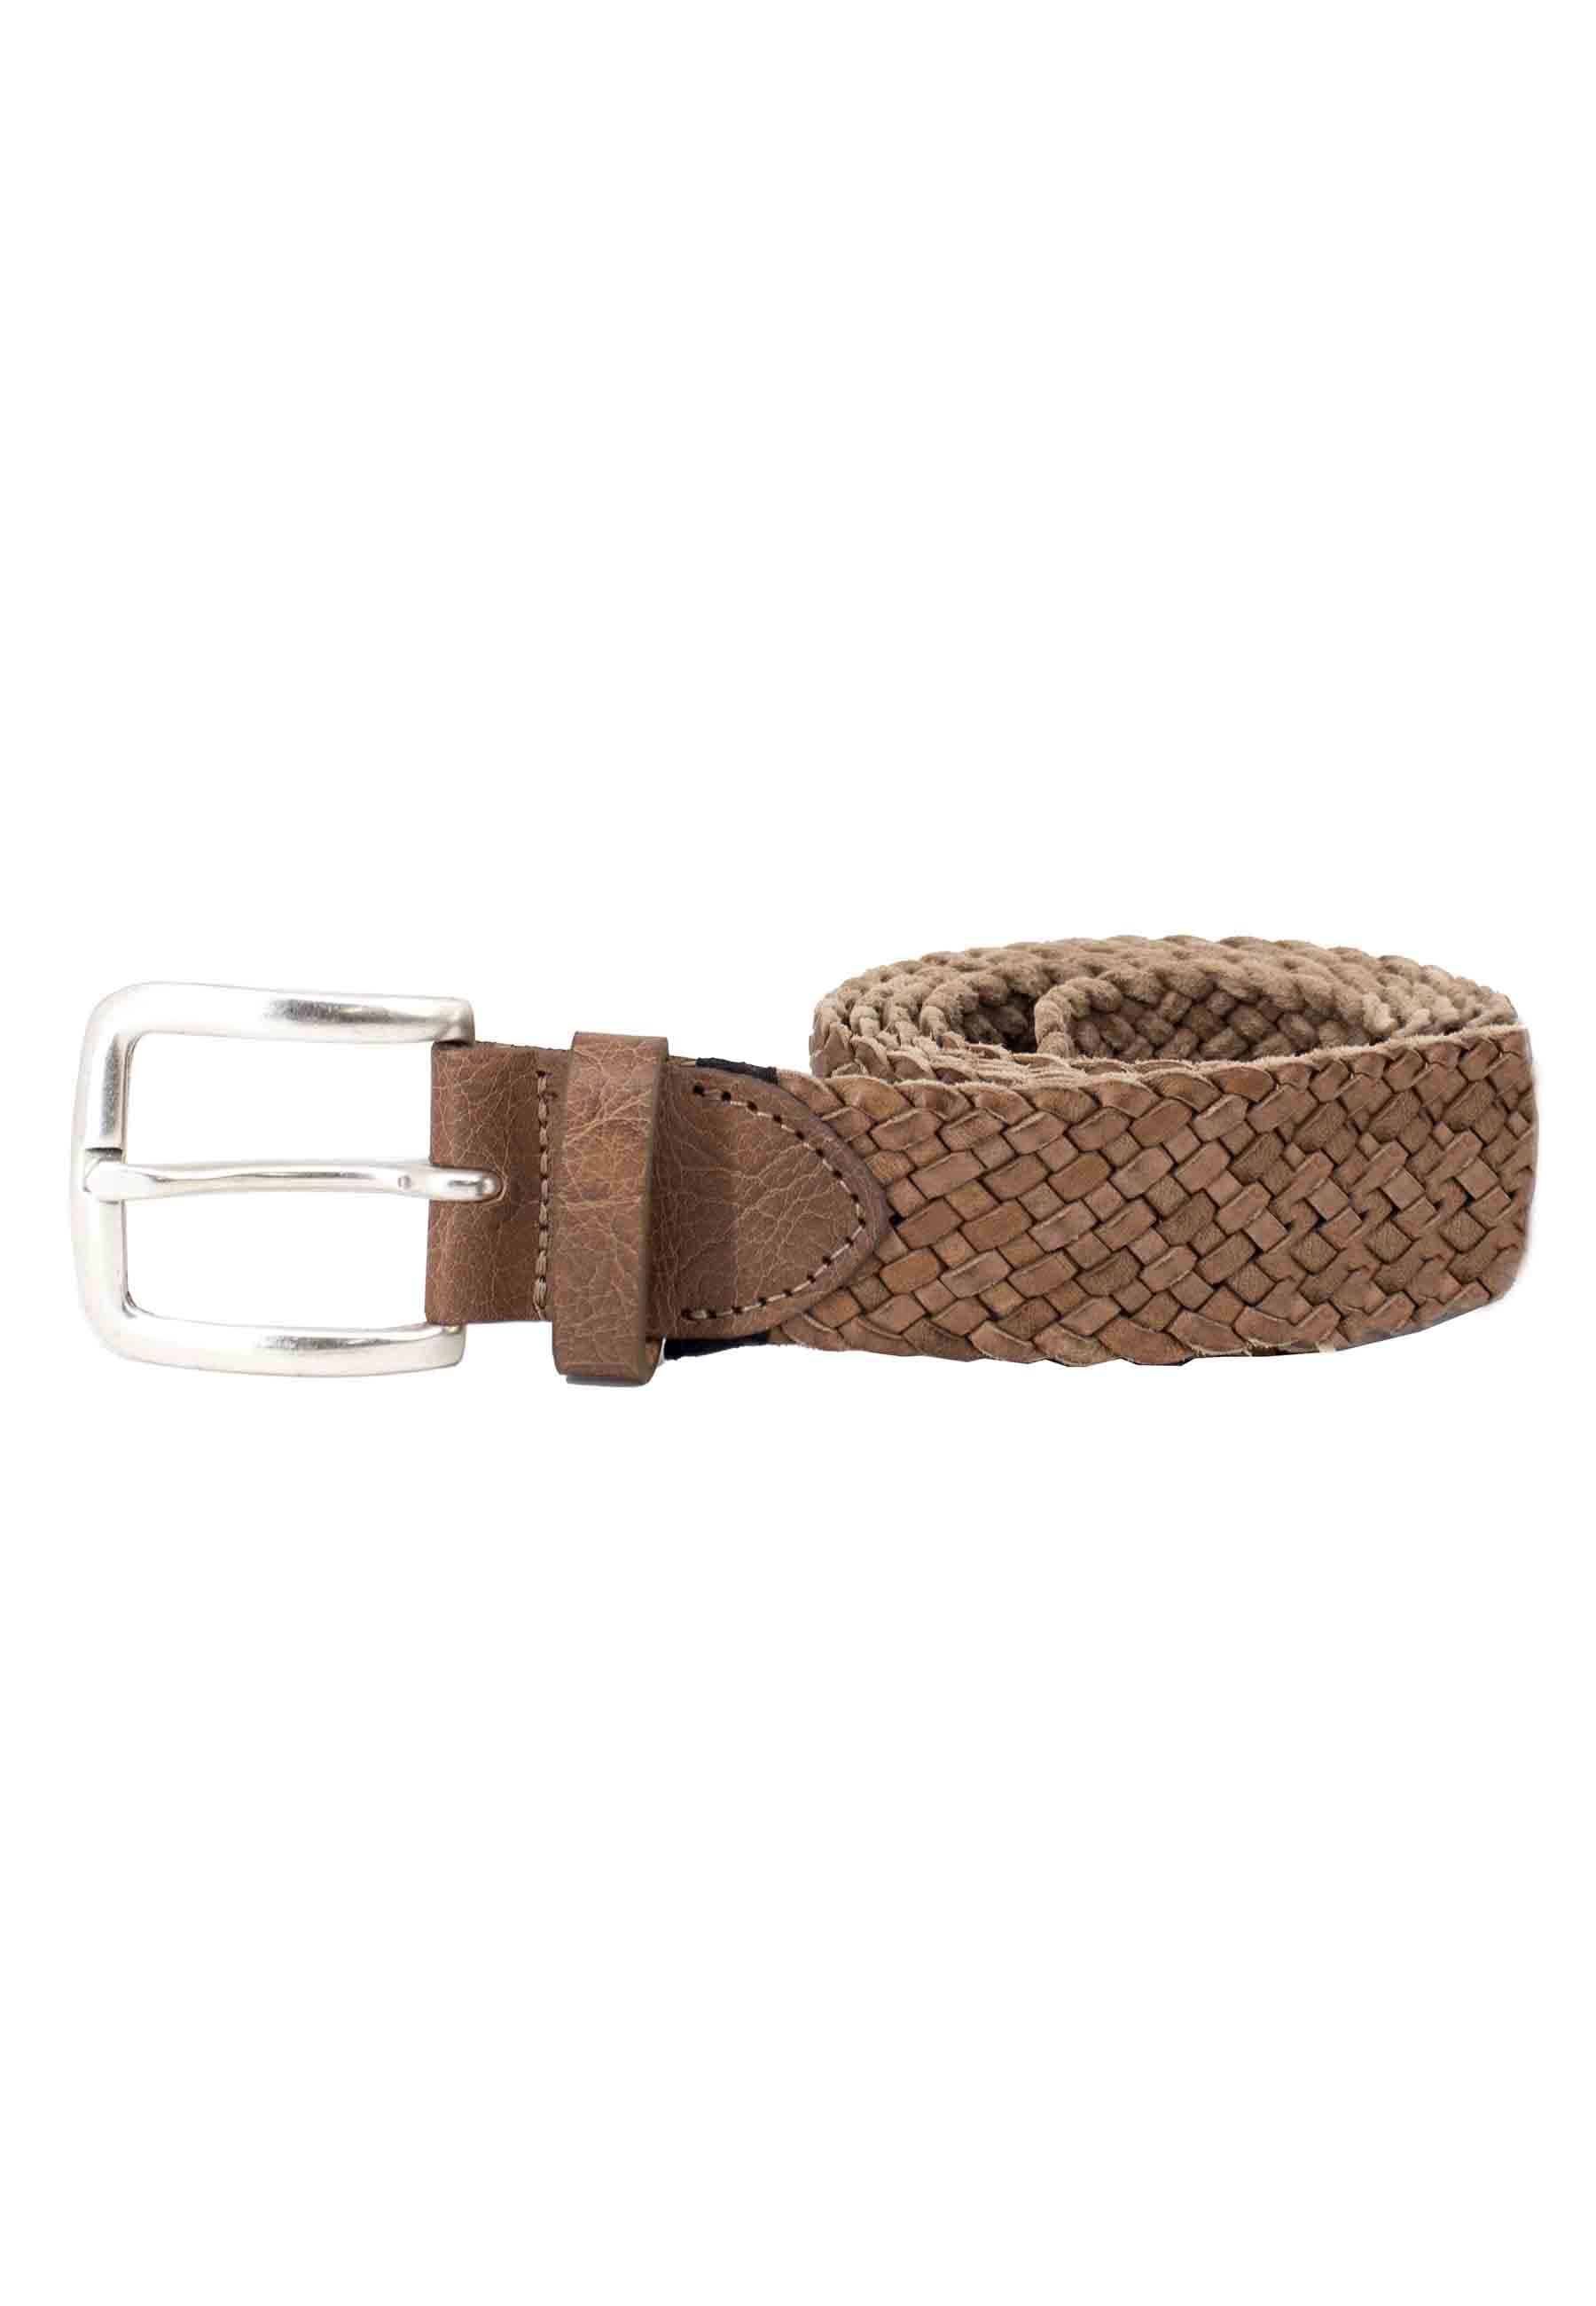 Men's taupe woven leather belt with silver buckle